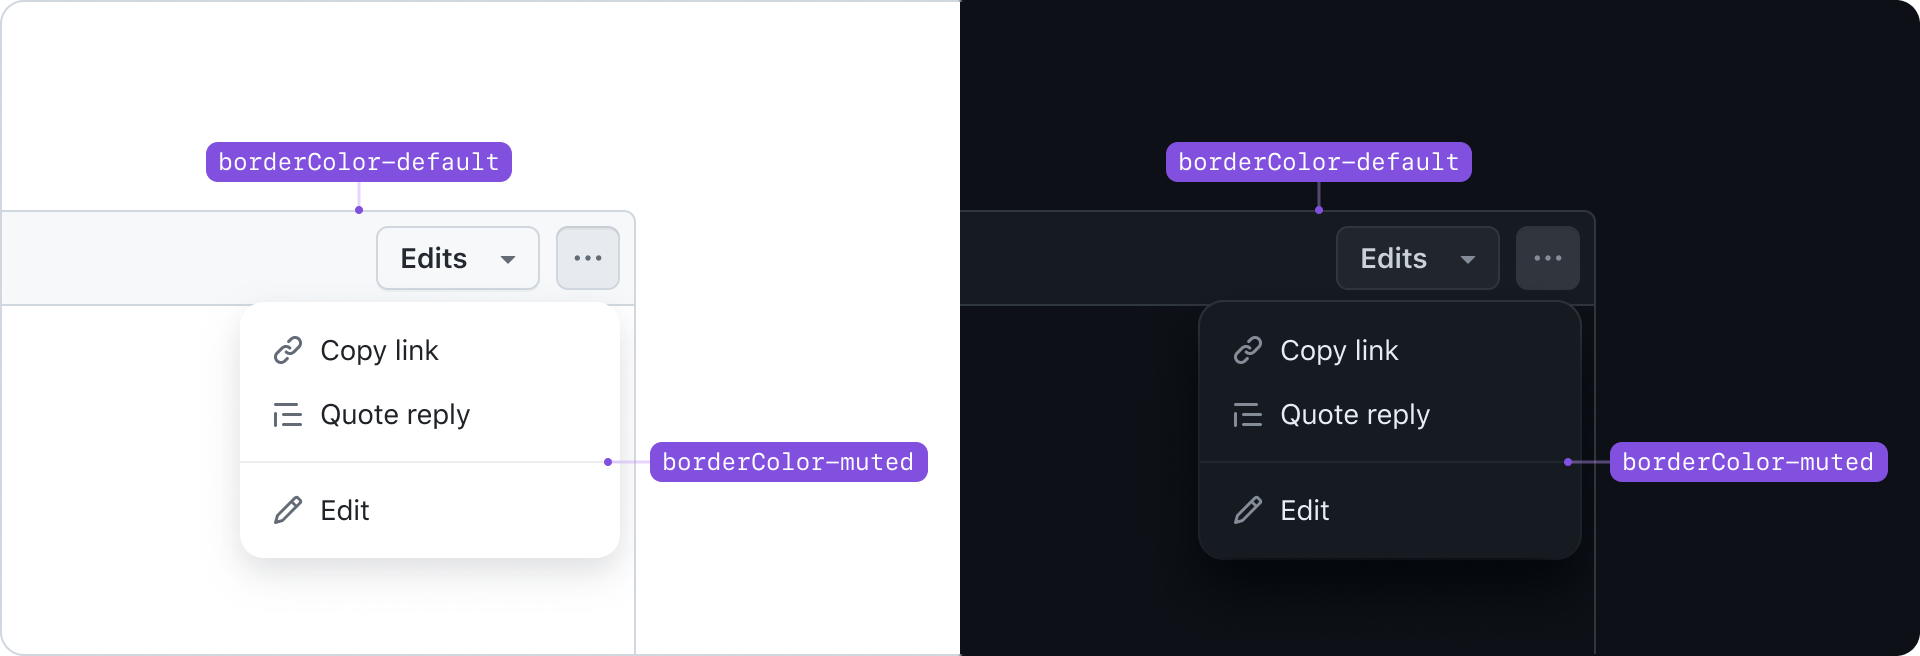 GitHub interface dropdown menu with border color annotations in light and dark themes. In light mode, the dropdown is outlined with 'borderColor-default', while menu options are separated by 'borderColor-muted'. In dark mode, the same color roles apply with adjusted shades for contrast.